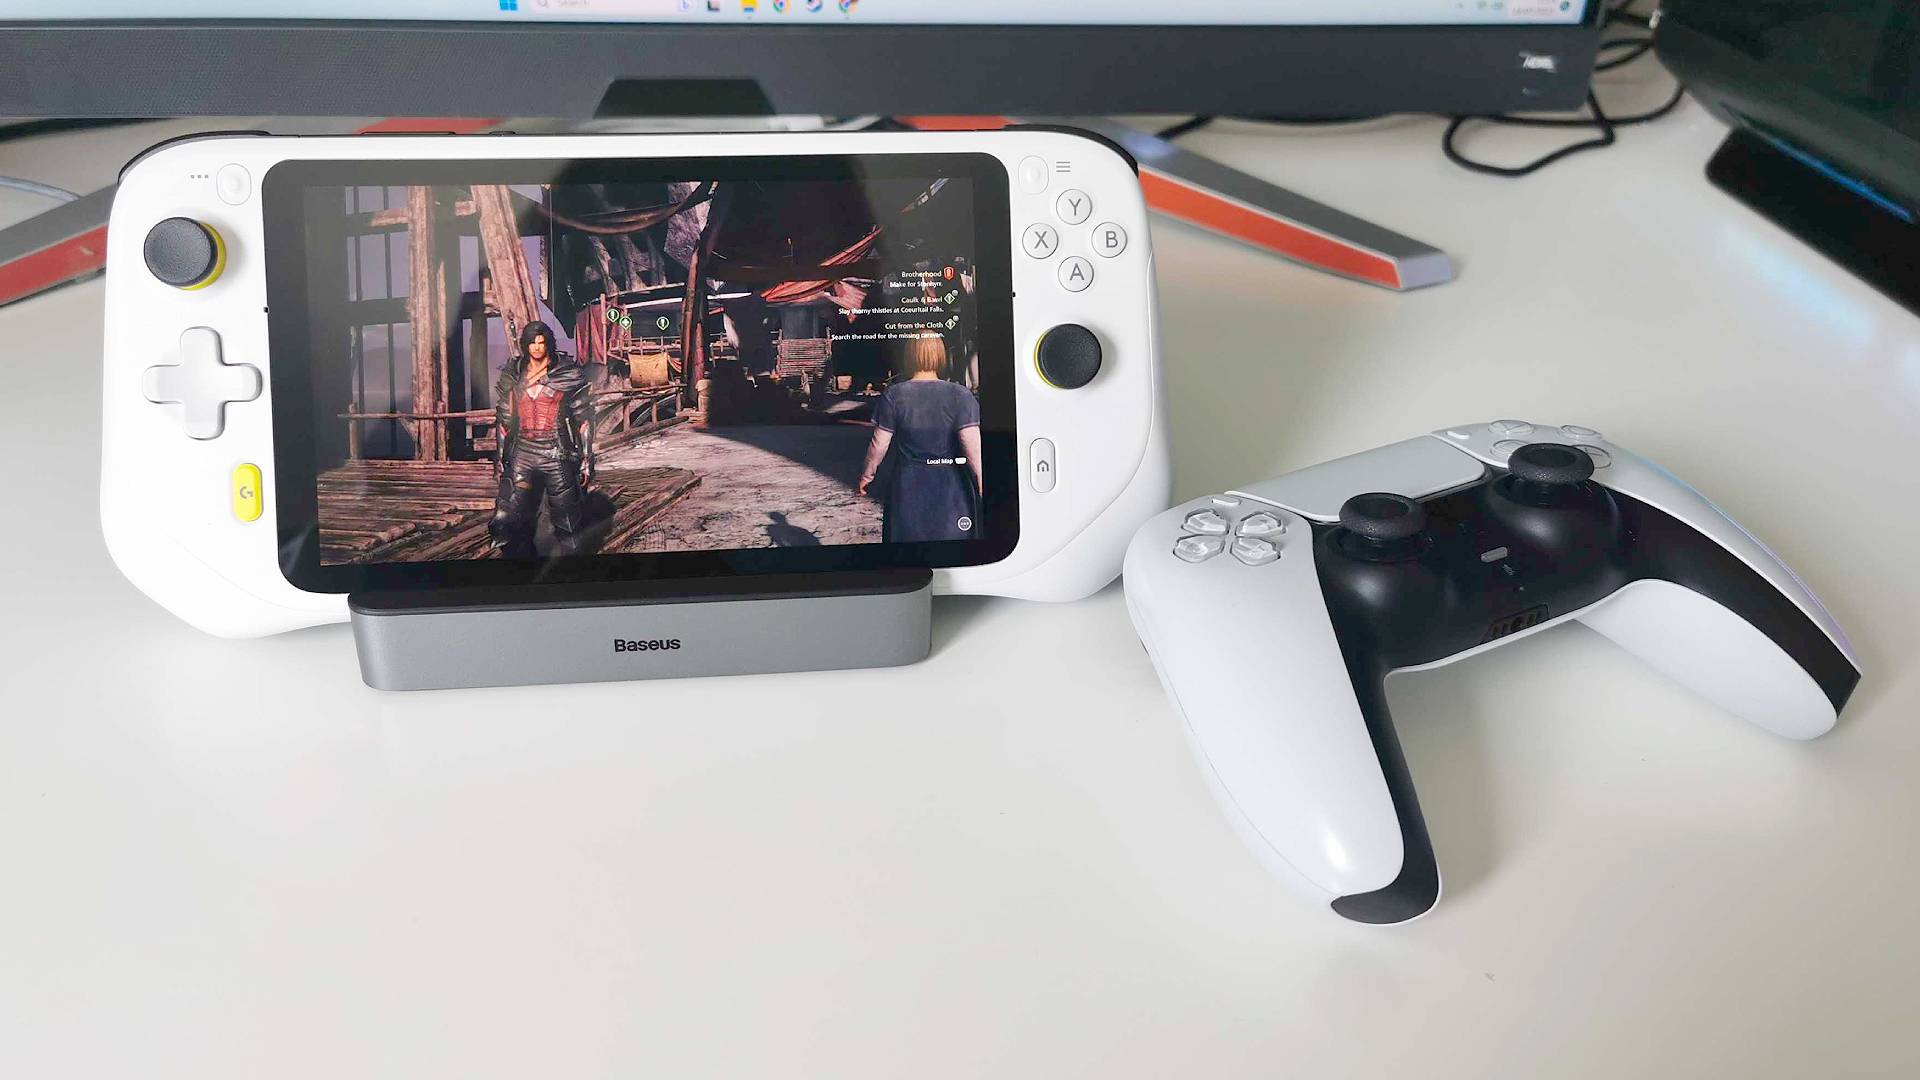 How to Stream PlayStation 5 Games to All Your Devices With Remote Play